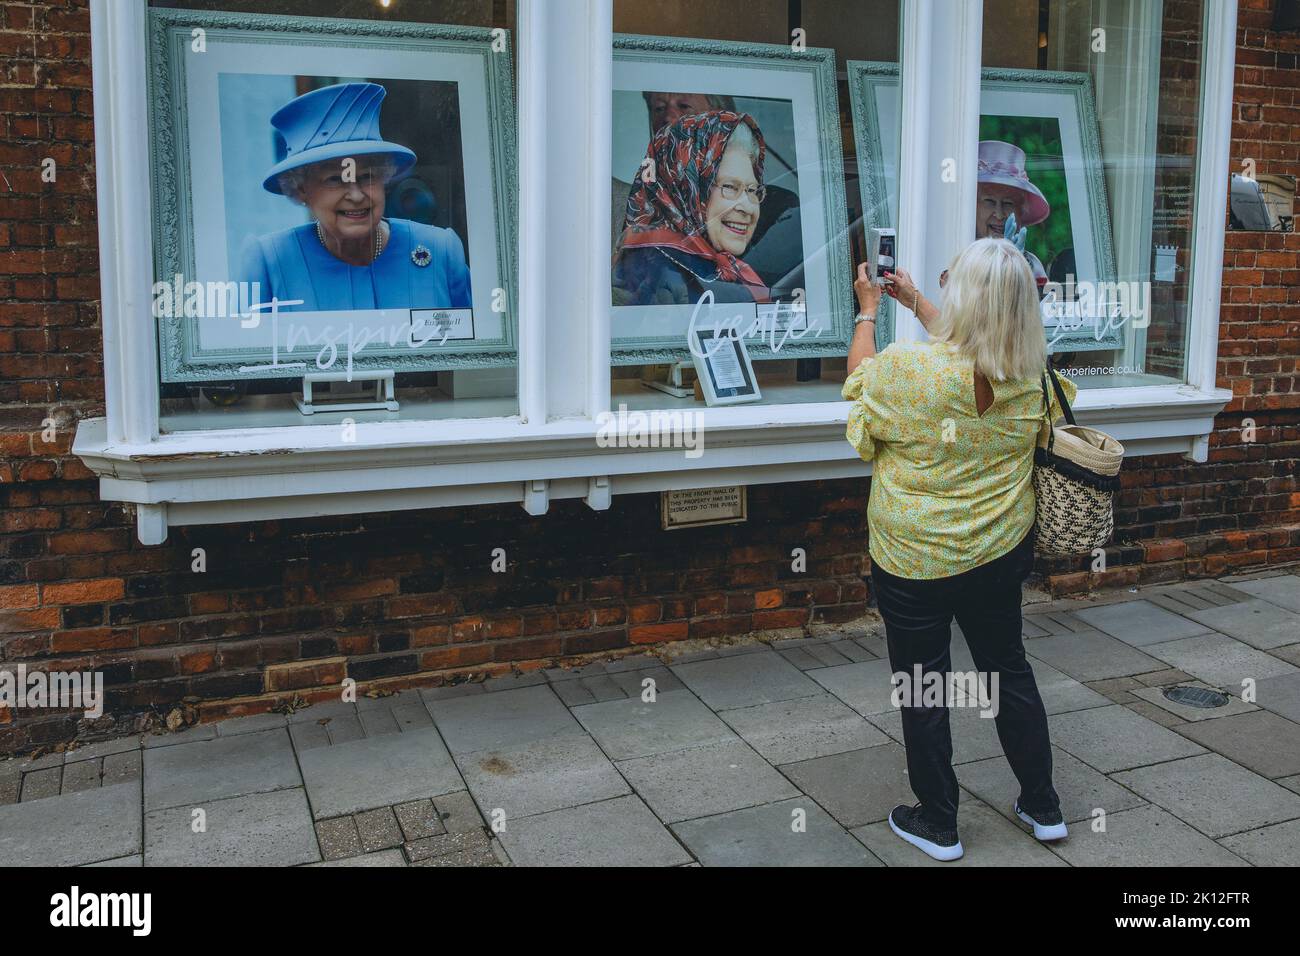 Windsor, UK. 14th September, 2022. A woman takes a photograph of portraits of Queen Elizabeth II displayed in the windows of an art gallery. Queen Elizabeth II, the UK's longest-serving monarch, died at Balmoral aged 96 on 8th September after a reign lasting 70 years and will be buried in the King George VI memorial chapel in Windsor following a state funeral in Westminster Abbey on 19th September. Credit: Mark Kerrison/Alamy Live News Stock Photo